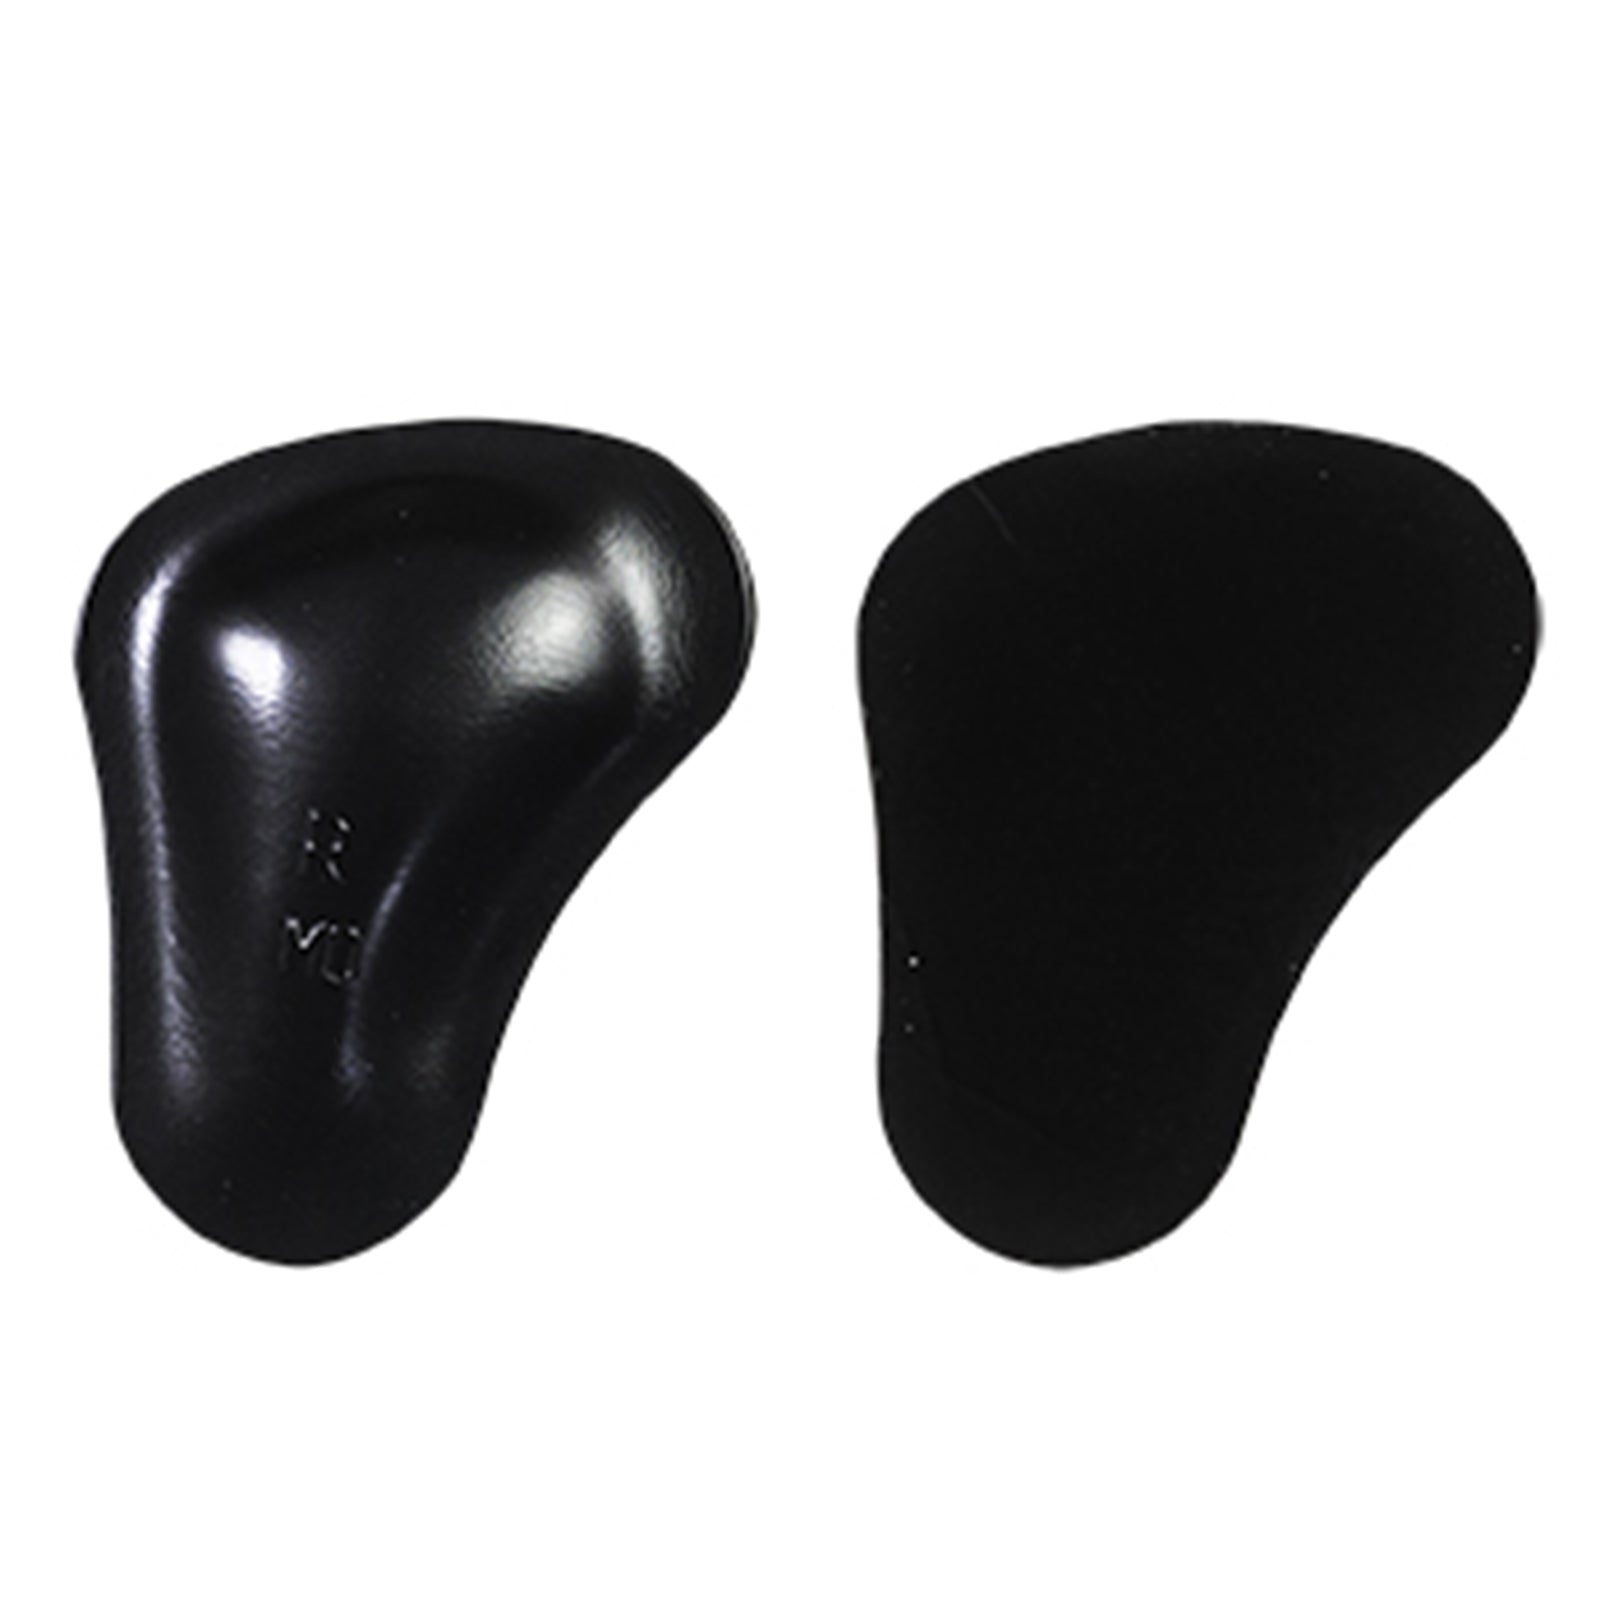 A black insole made of Technogel®